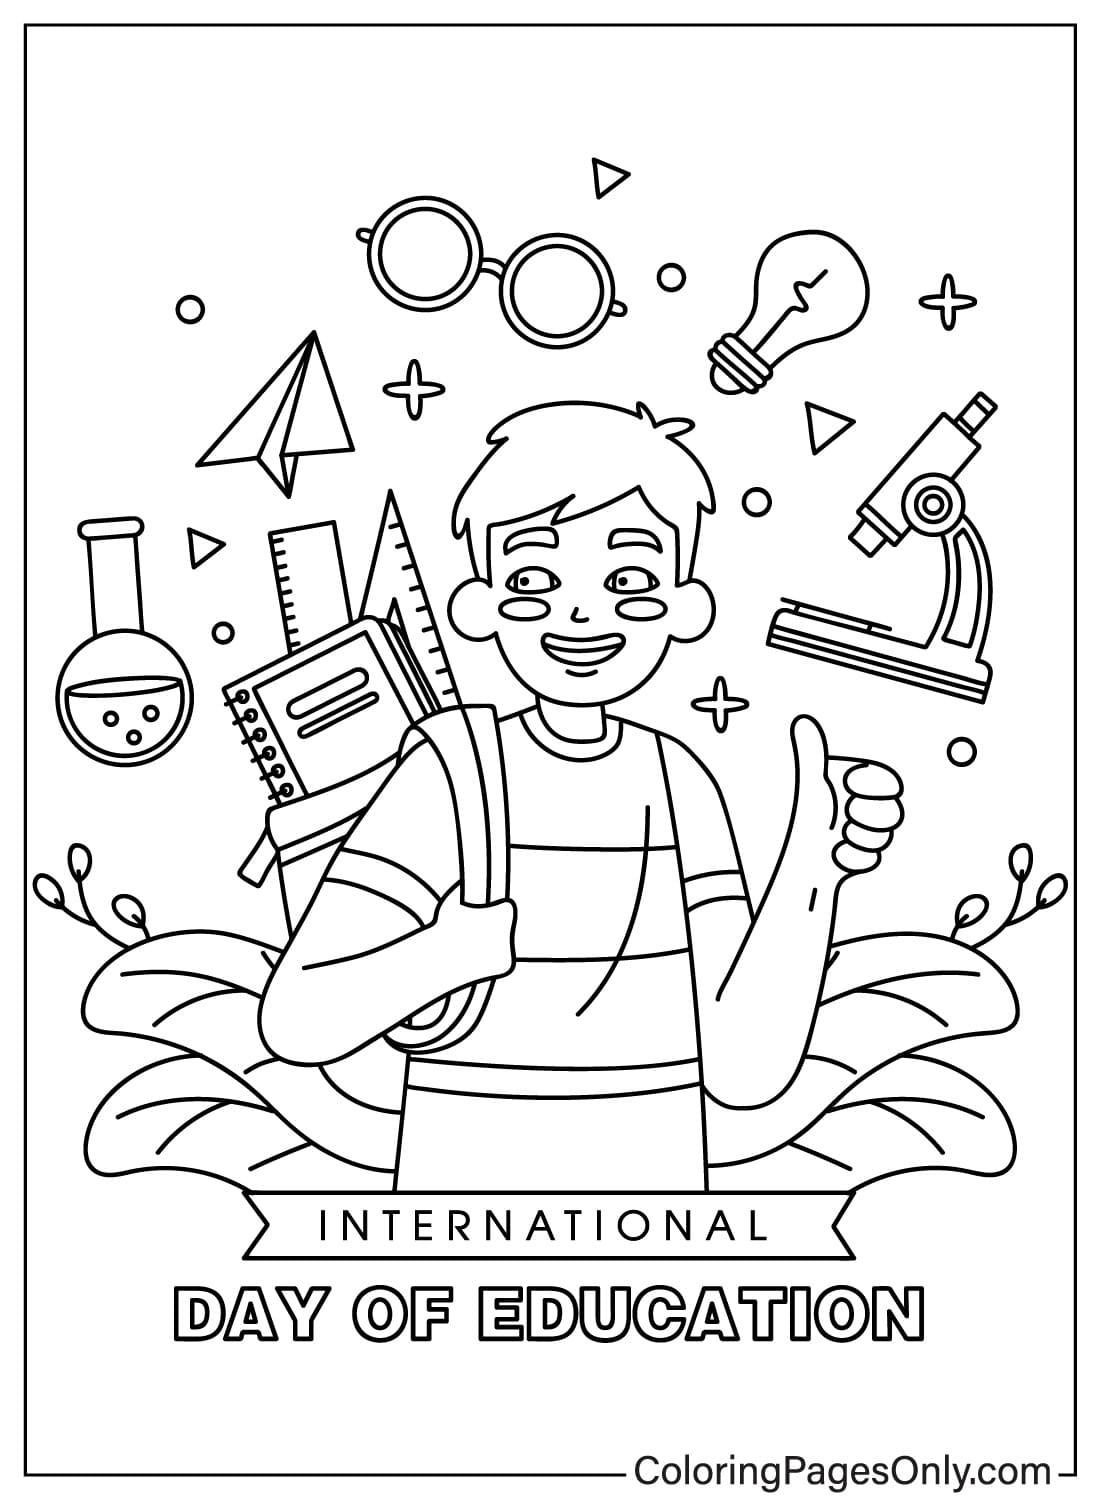 International Day of Education Coloring Page to Printable from International Day of Education